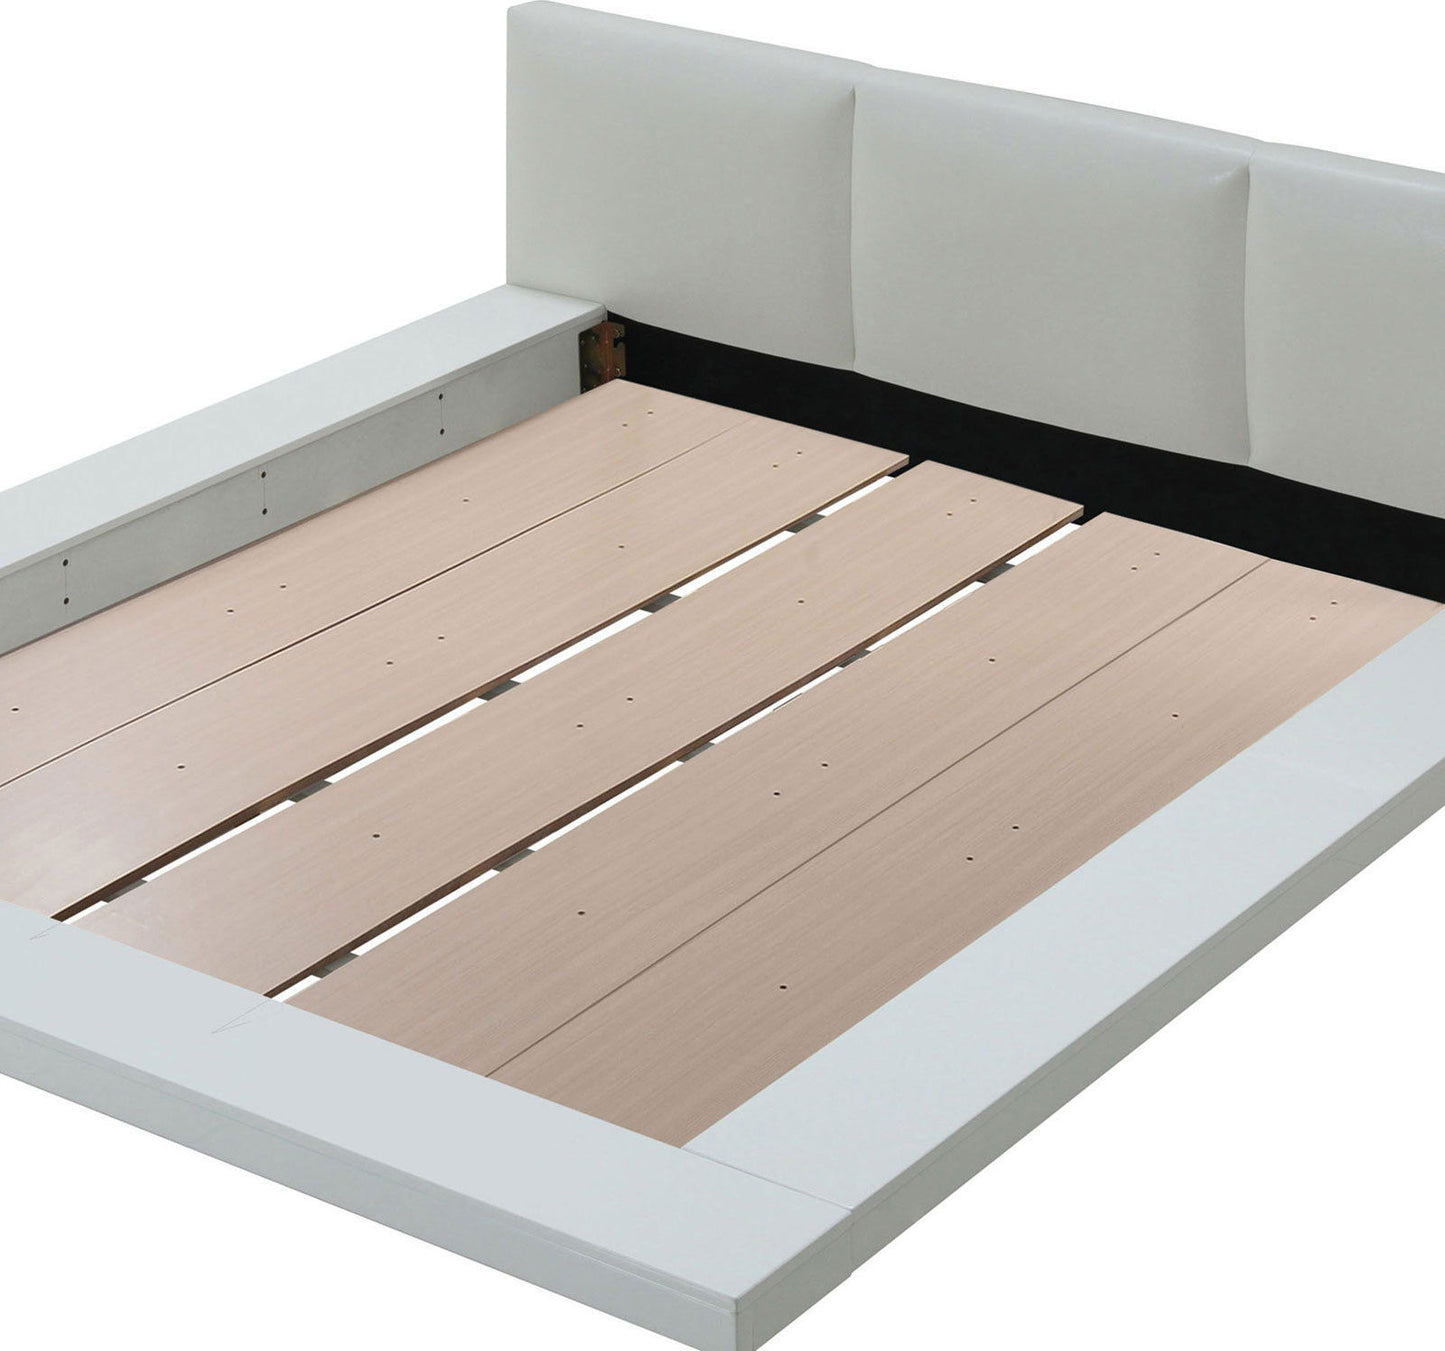 Christie - Upholstered Bed